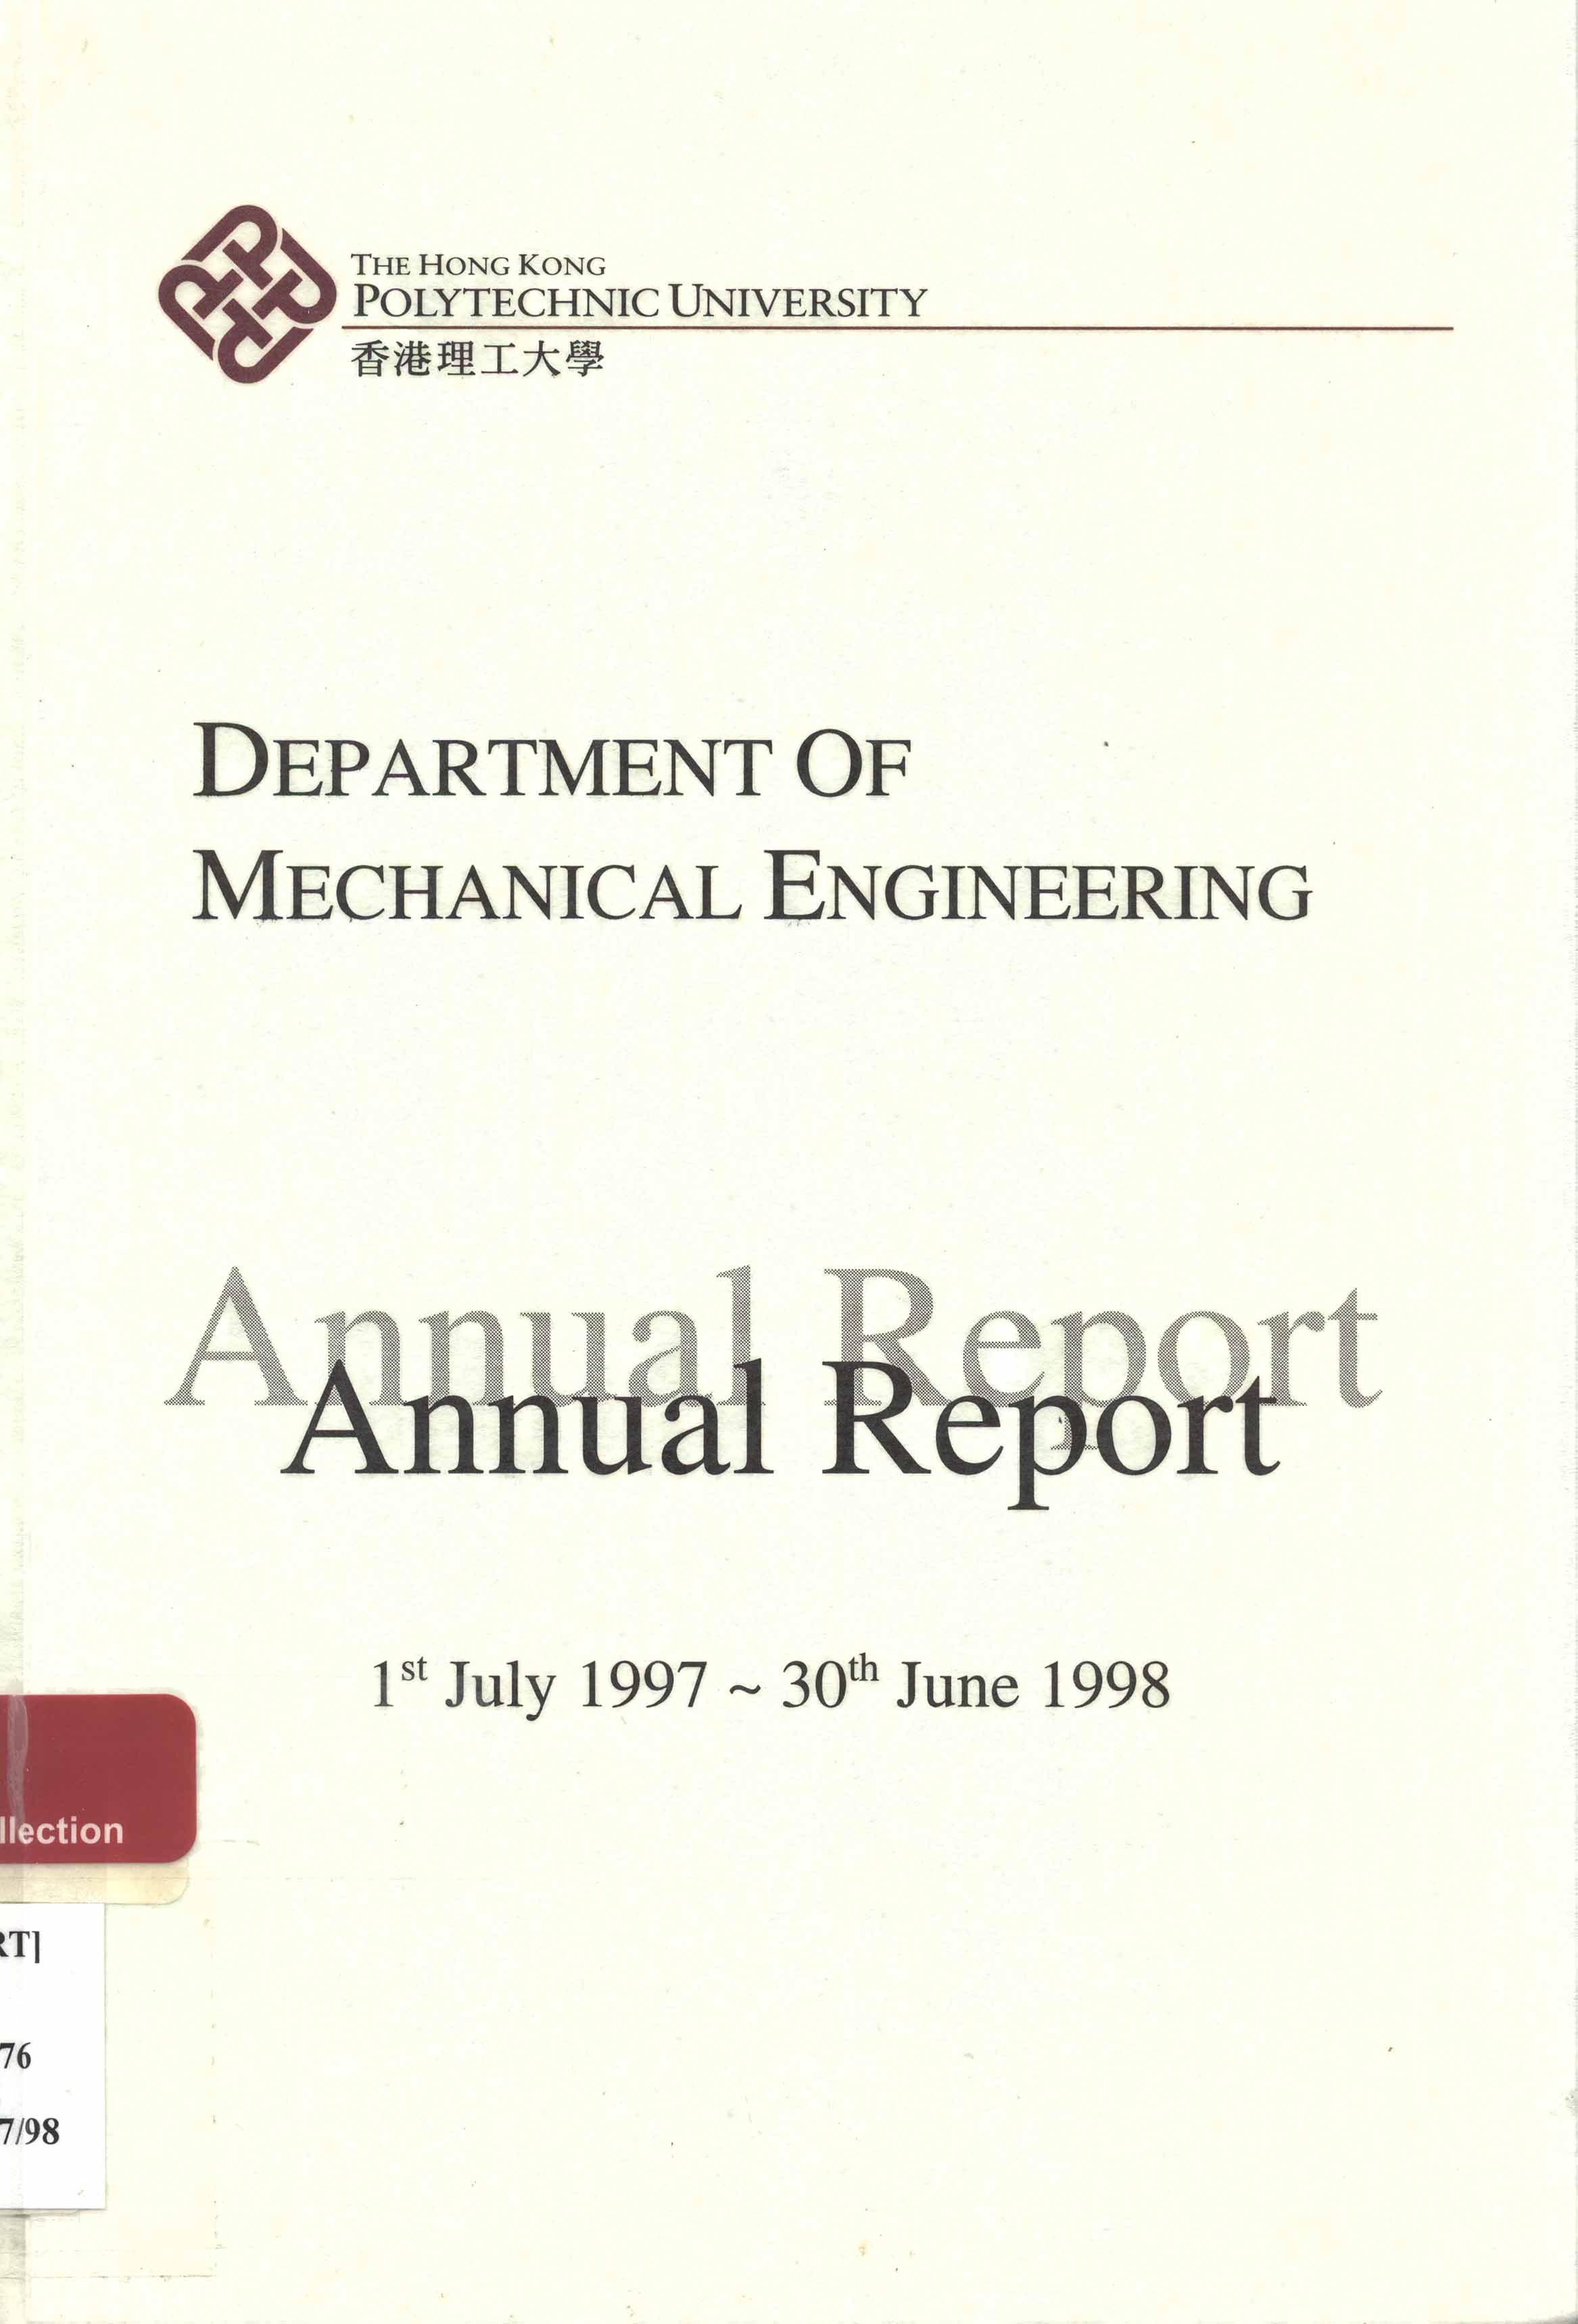 Hong Kong Polytechnic University. Dept. of Mechanical Engineering - Annual report 1st July 1997 ~ 30th June 1998